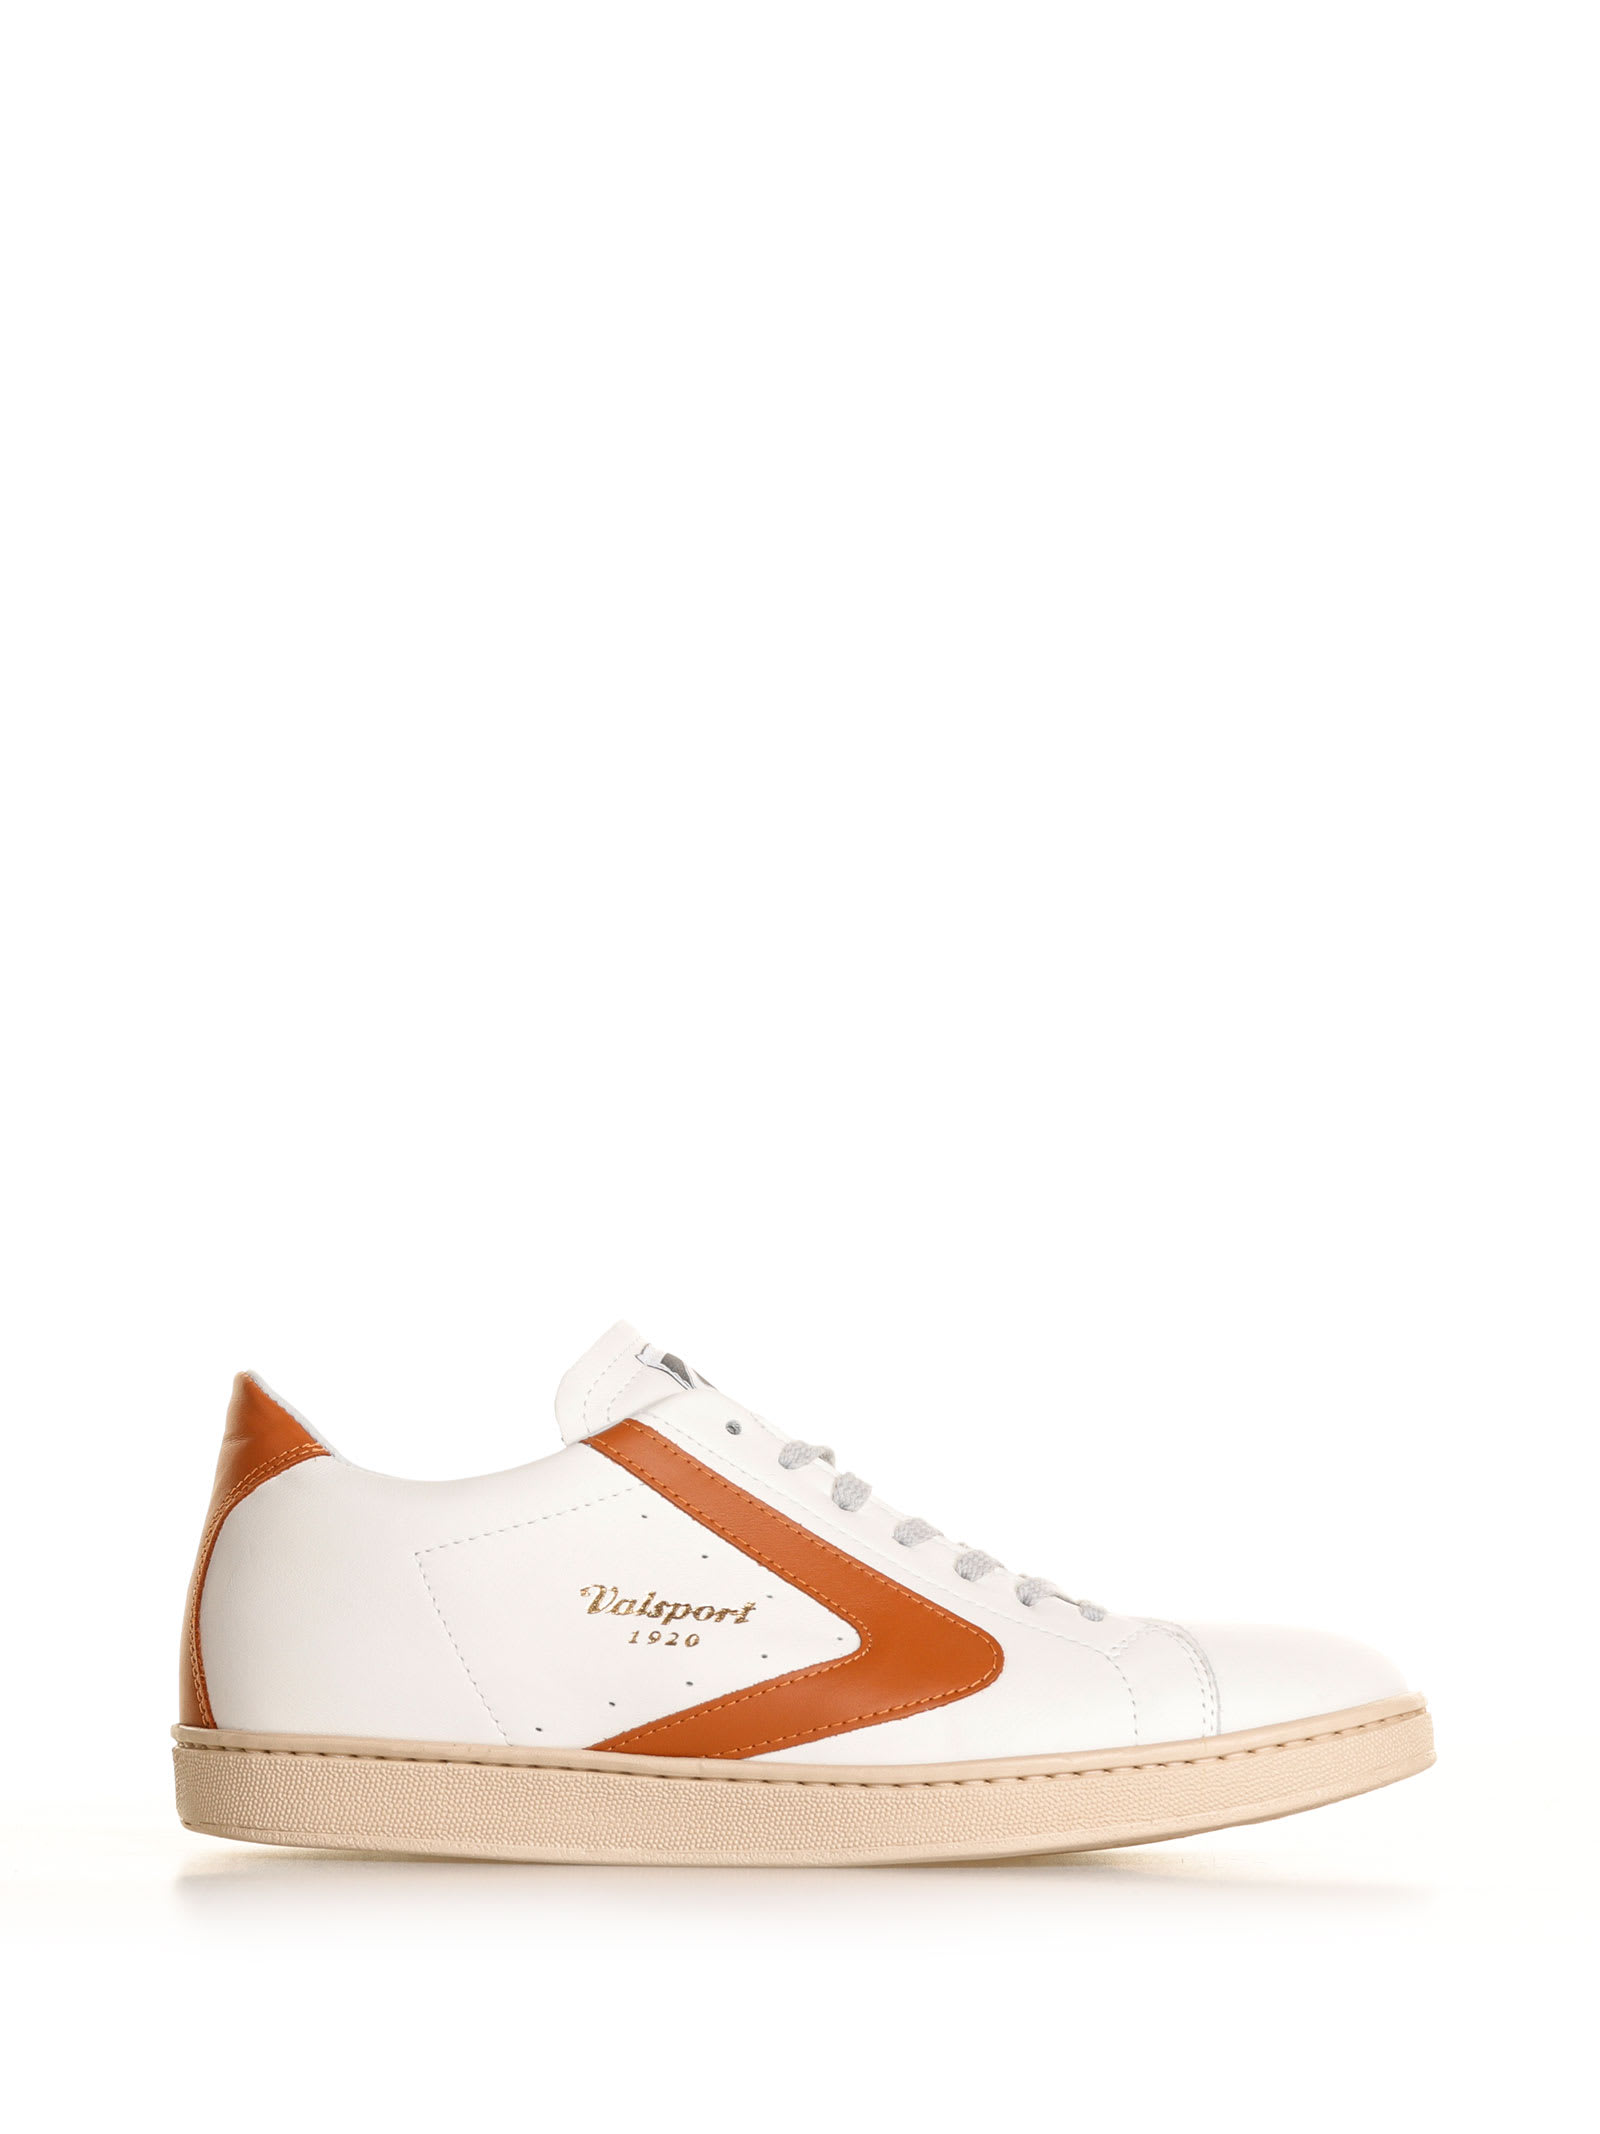 VALSPORT TOURNAMENT CLASSIC SNEAKER IN LEATHER